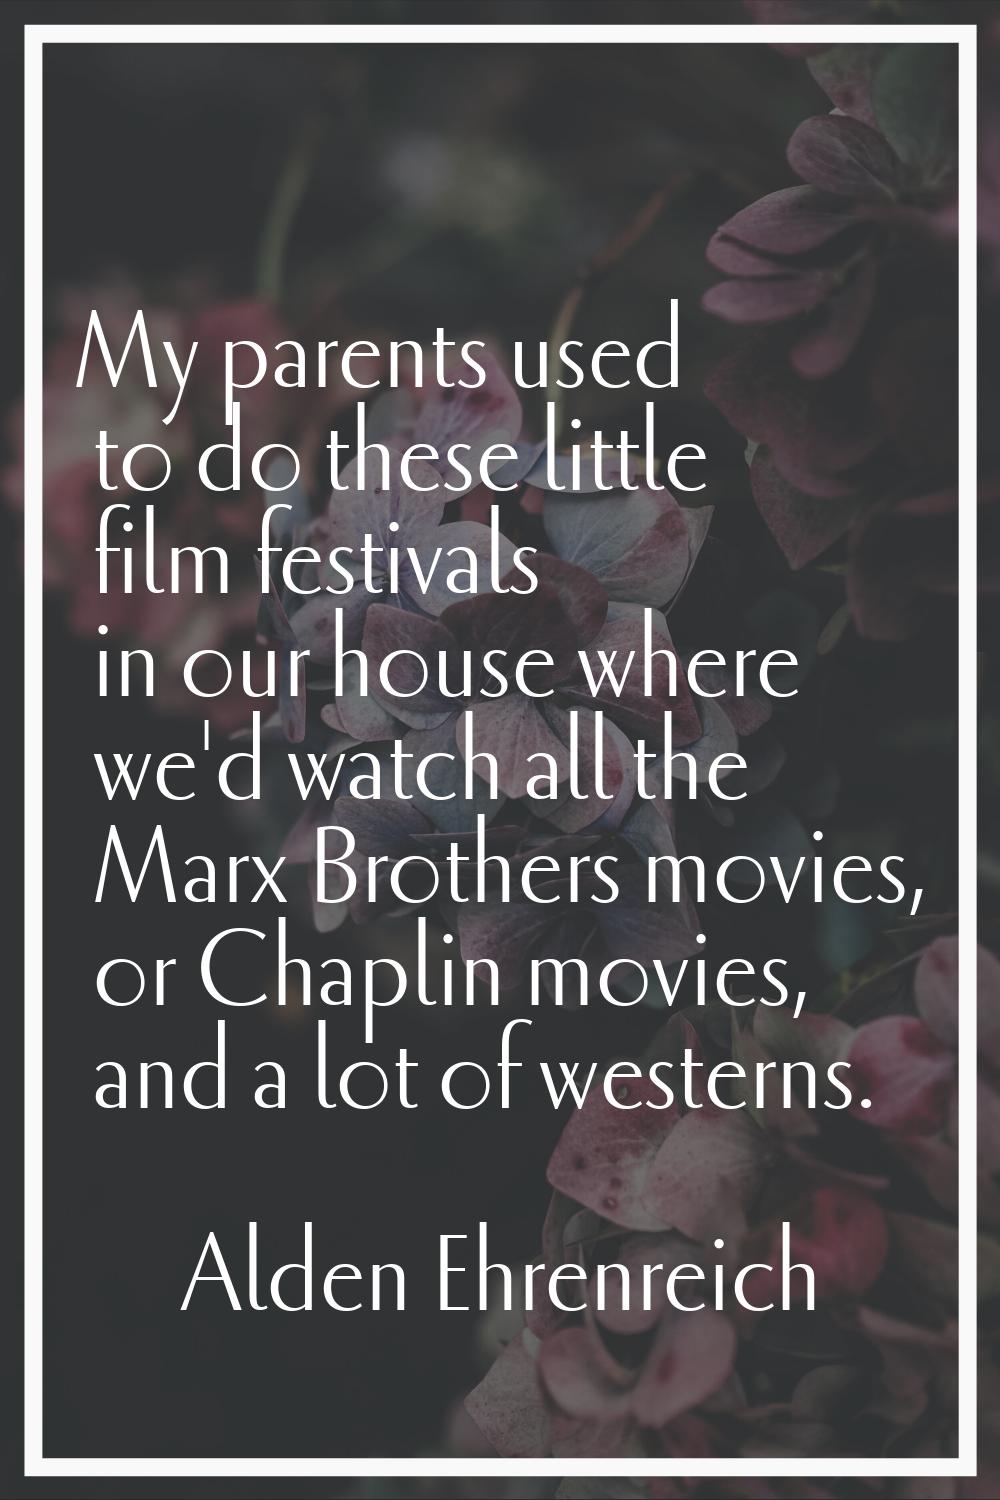 My parents used to do these little film festivals in our house where we'd watch all the Marx Brothe